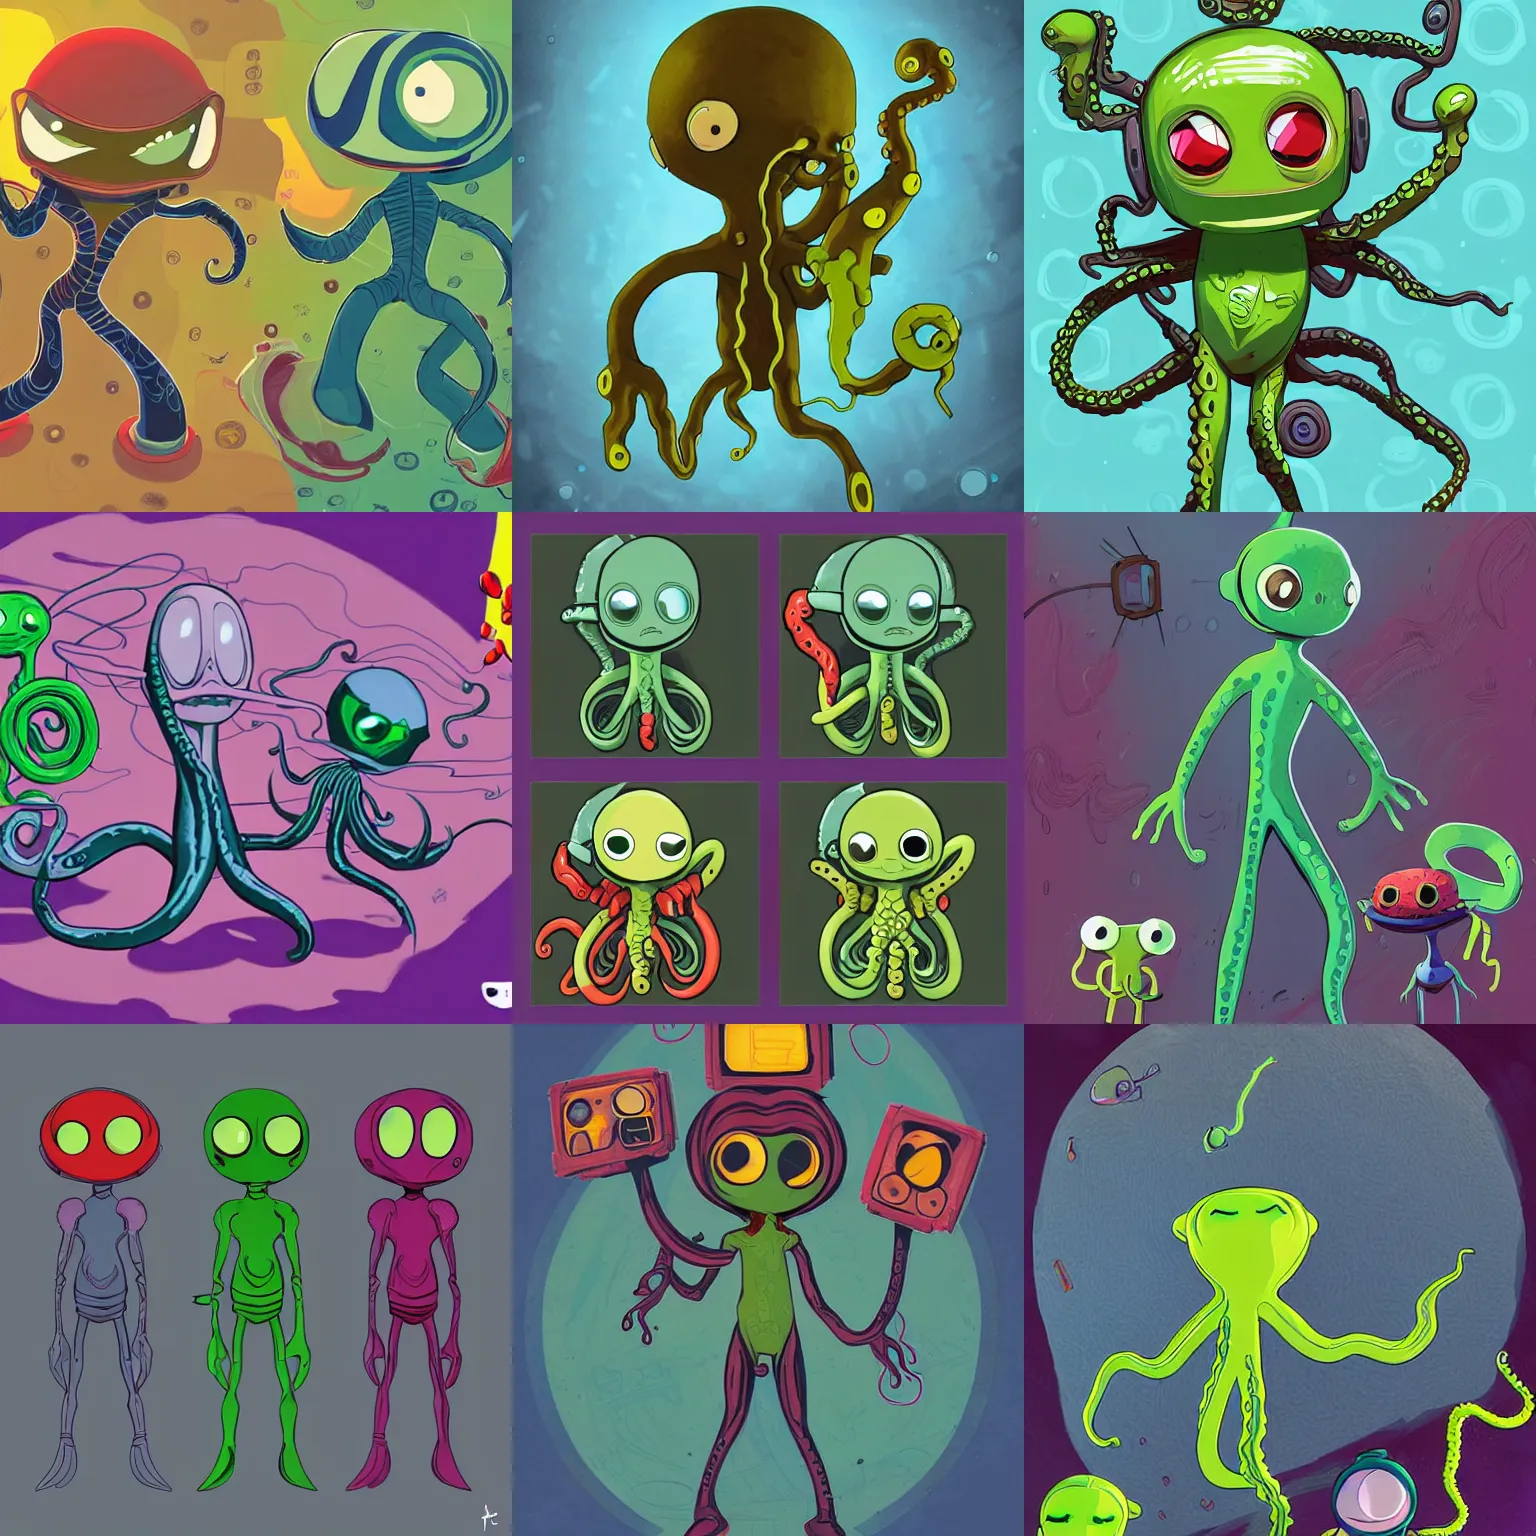 Prompt: friend shaped little alien race with webbed tentacle arms as playable character designs for the newest psychonauts video game made by double fine done by tim shafer that focuses on an ocean setting with help from the artist for the band gorillaz and the artists from odd world inhabitant inc and Lauren faust from her work on dc superhero girls and lead artist Andy Suriano from rise of the teenage mutant ninja turtles on nickelodeon using the color character color choices from Nintendos Splatoon game franchise